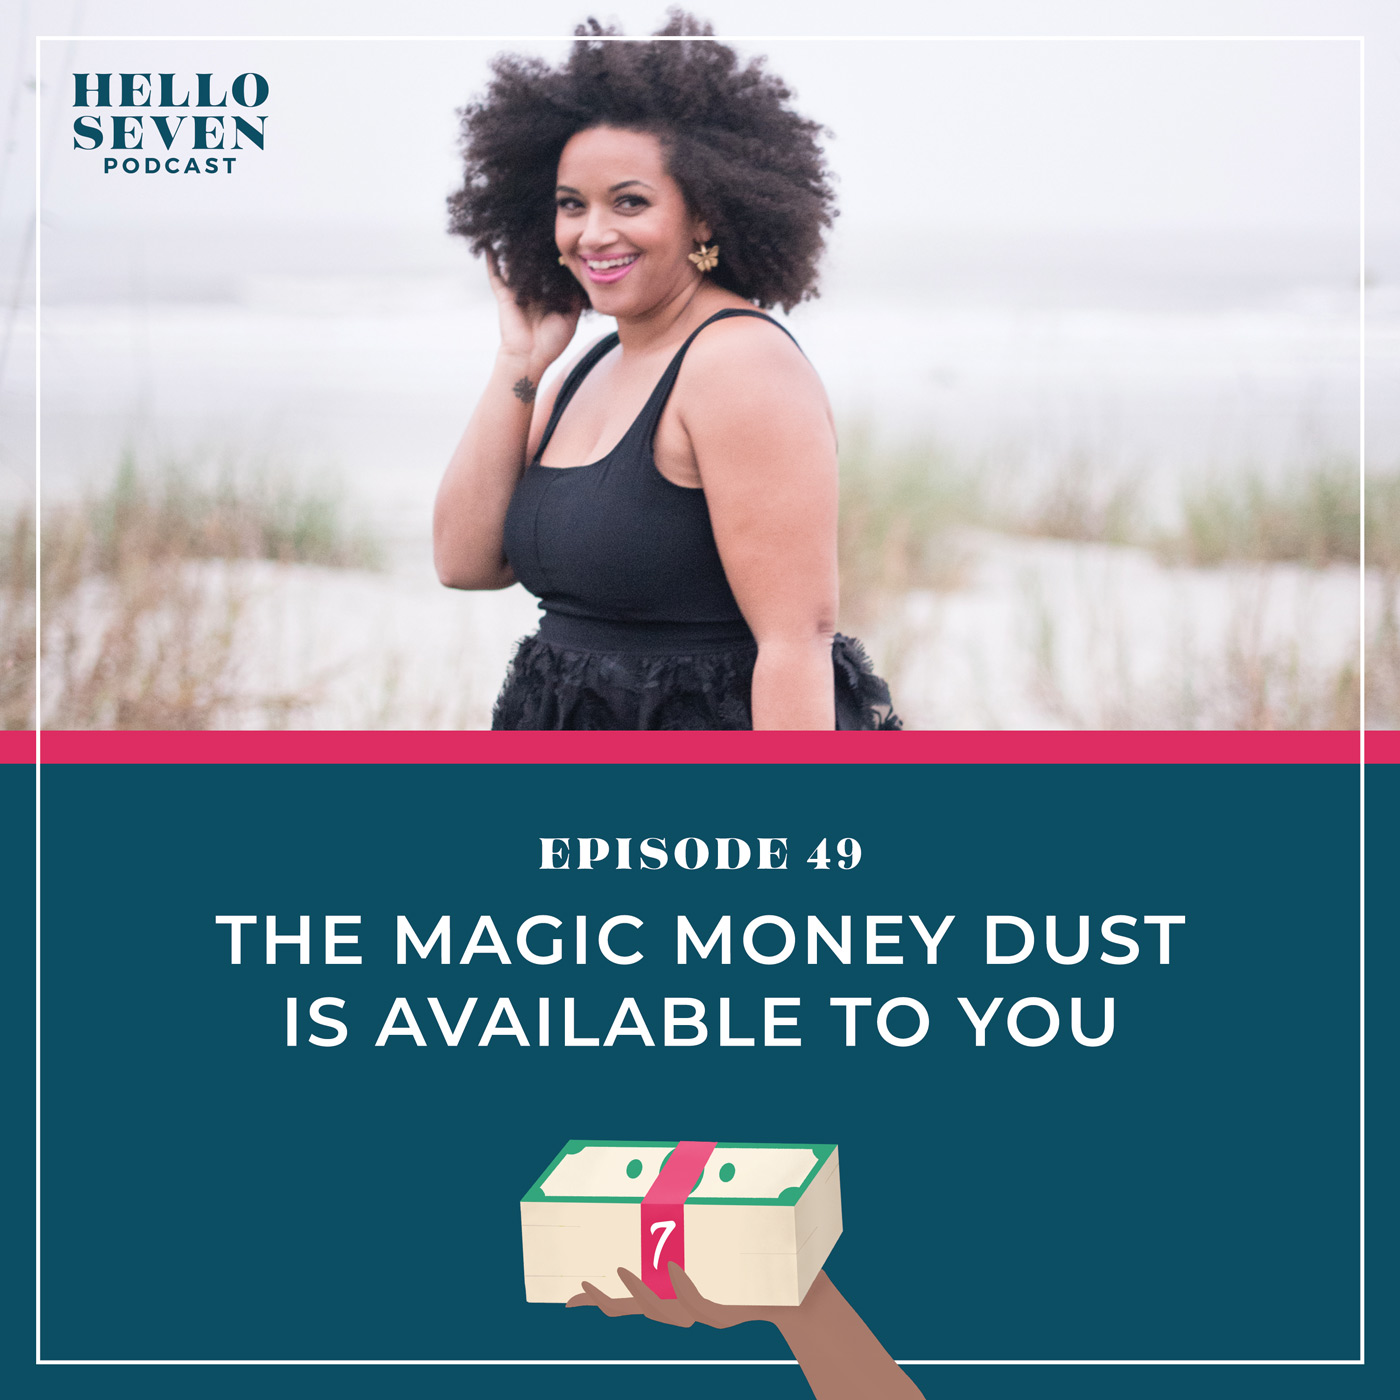 The Magic Money Dust Is Available to You